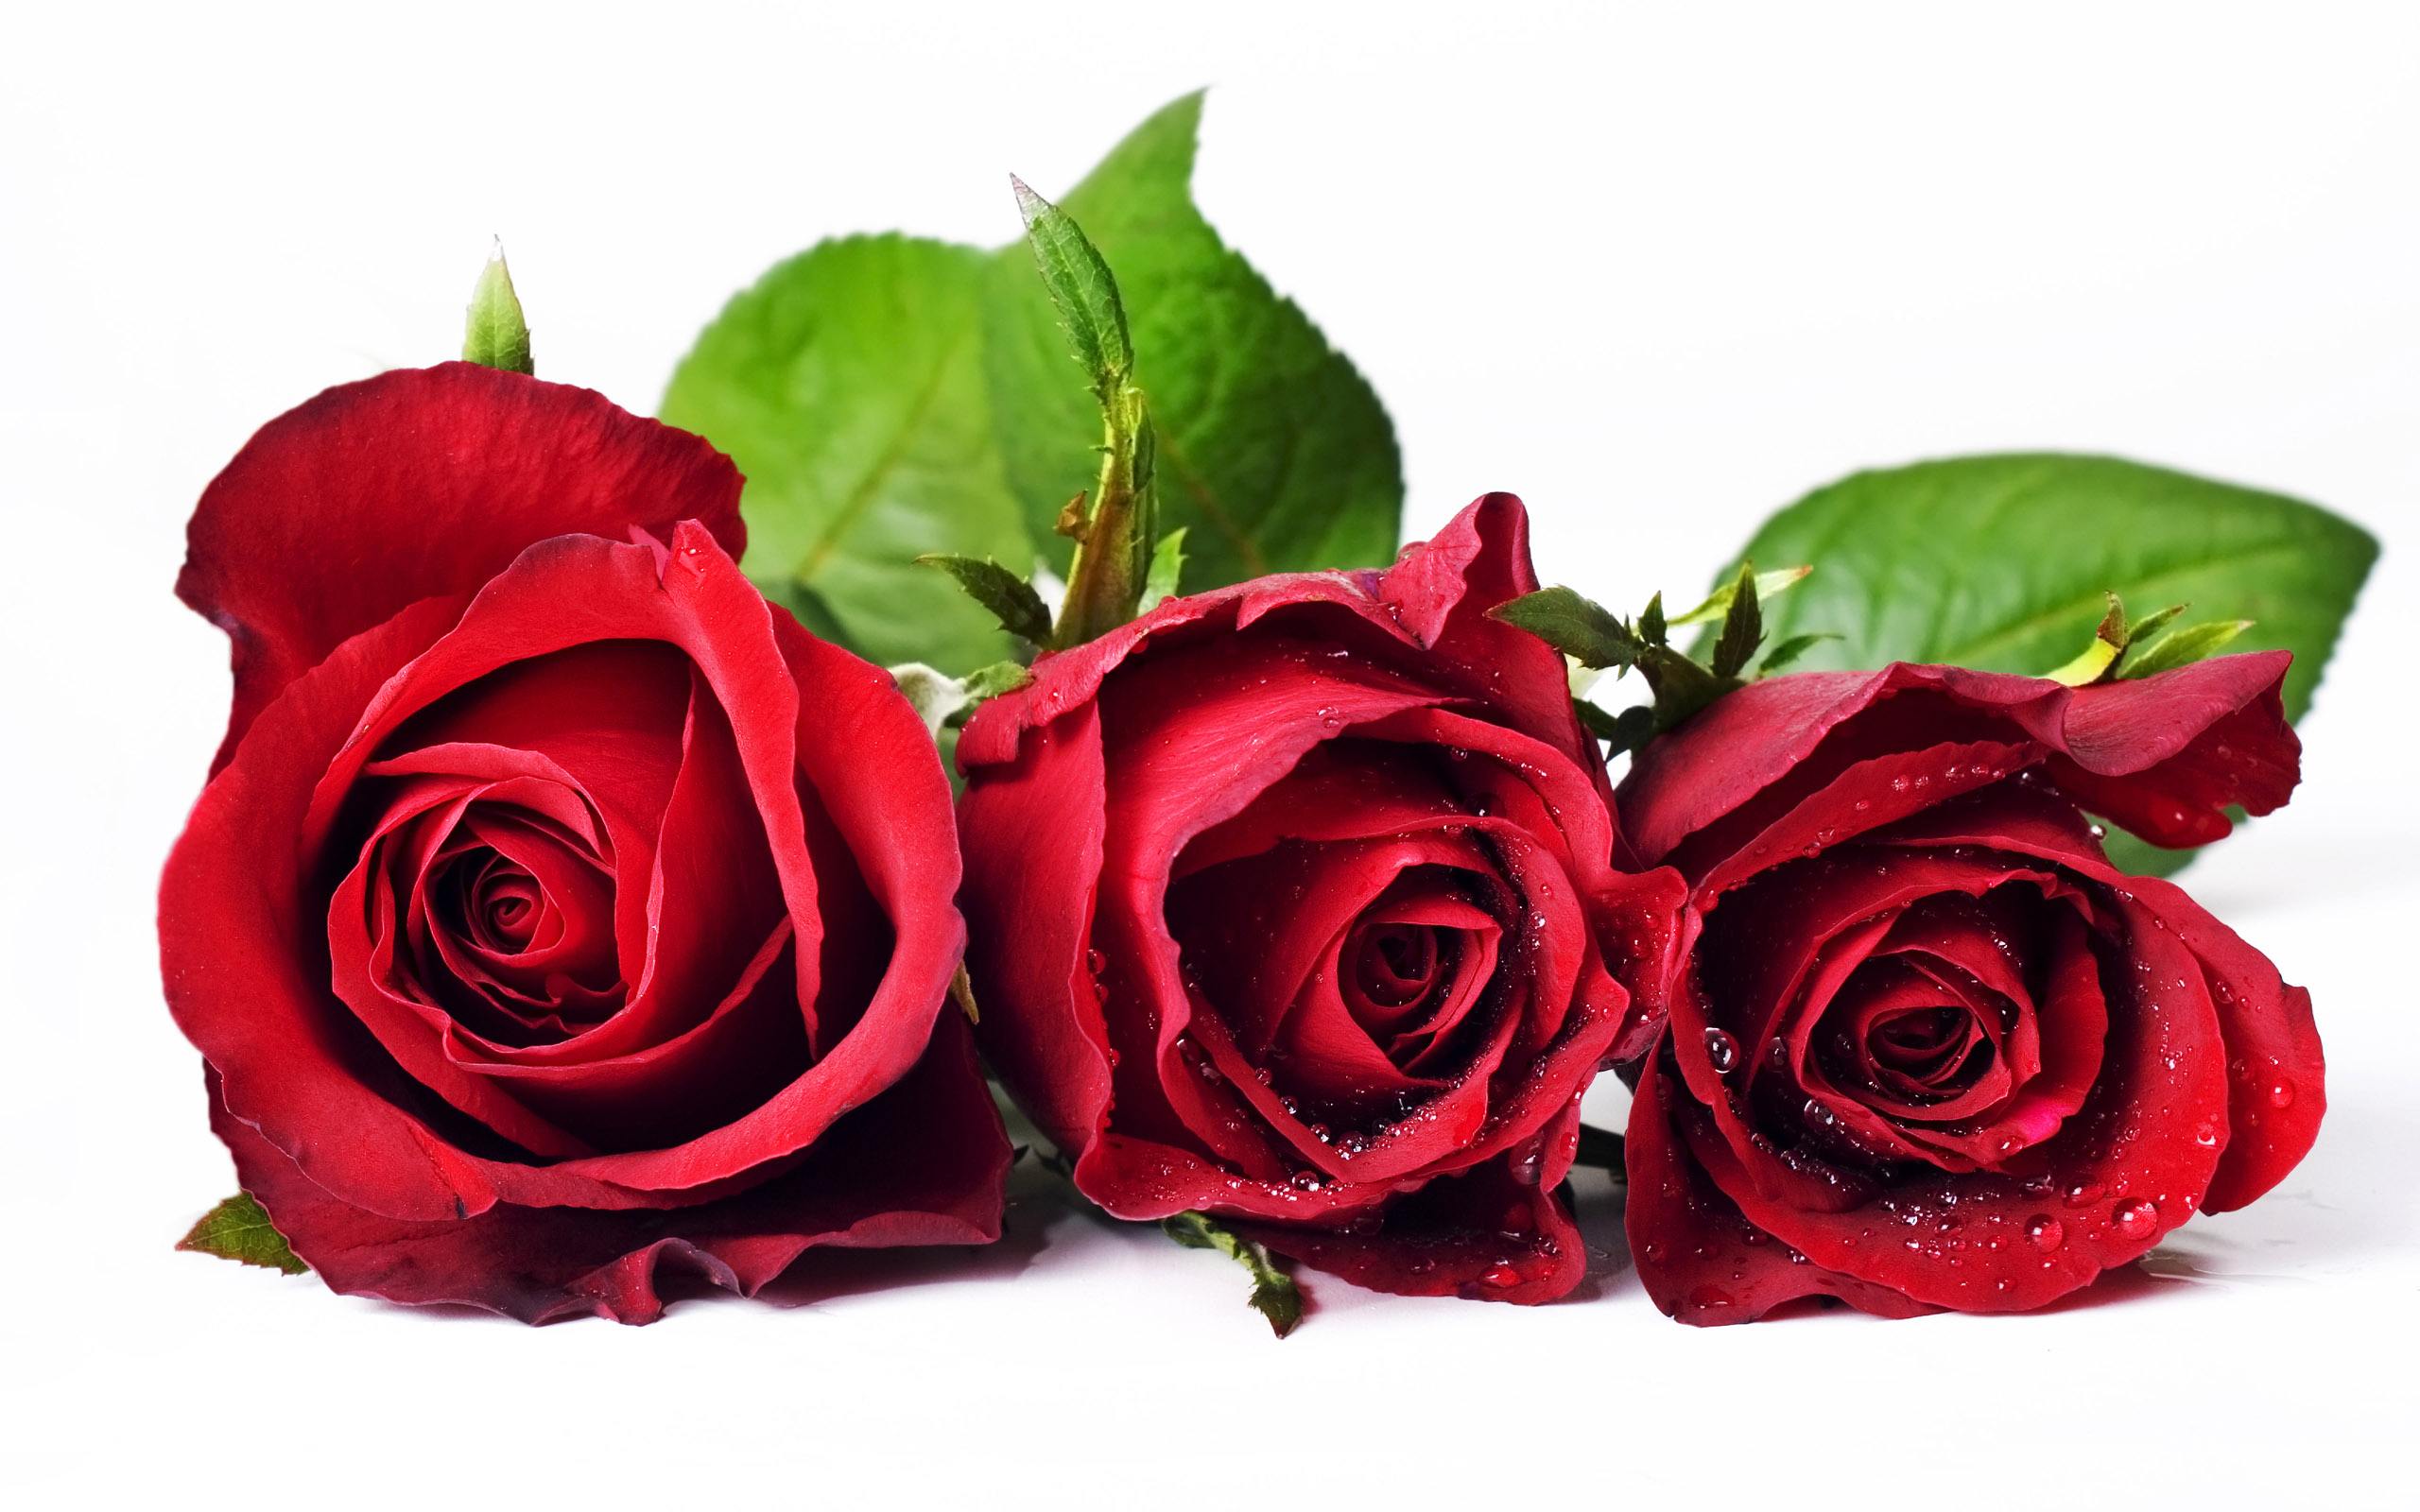 Provide rose microwave drying treatment solutions for leading enterprises in the hometown of roses in China